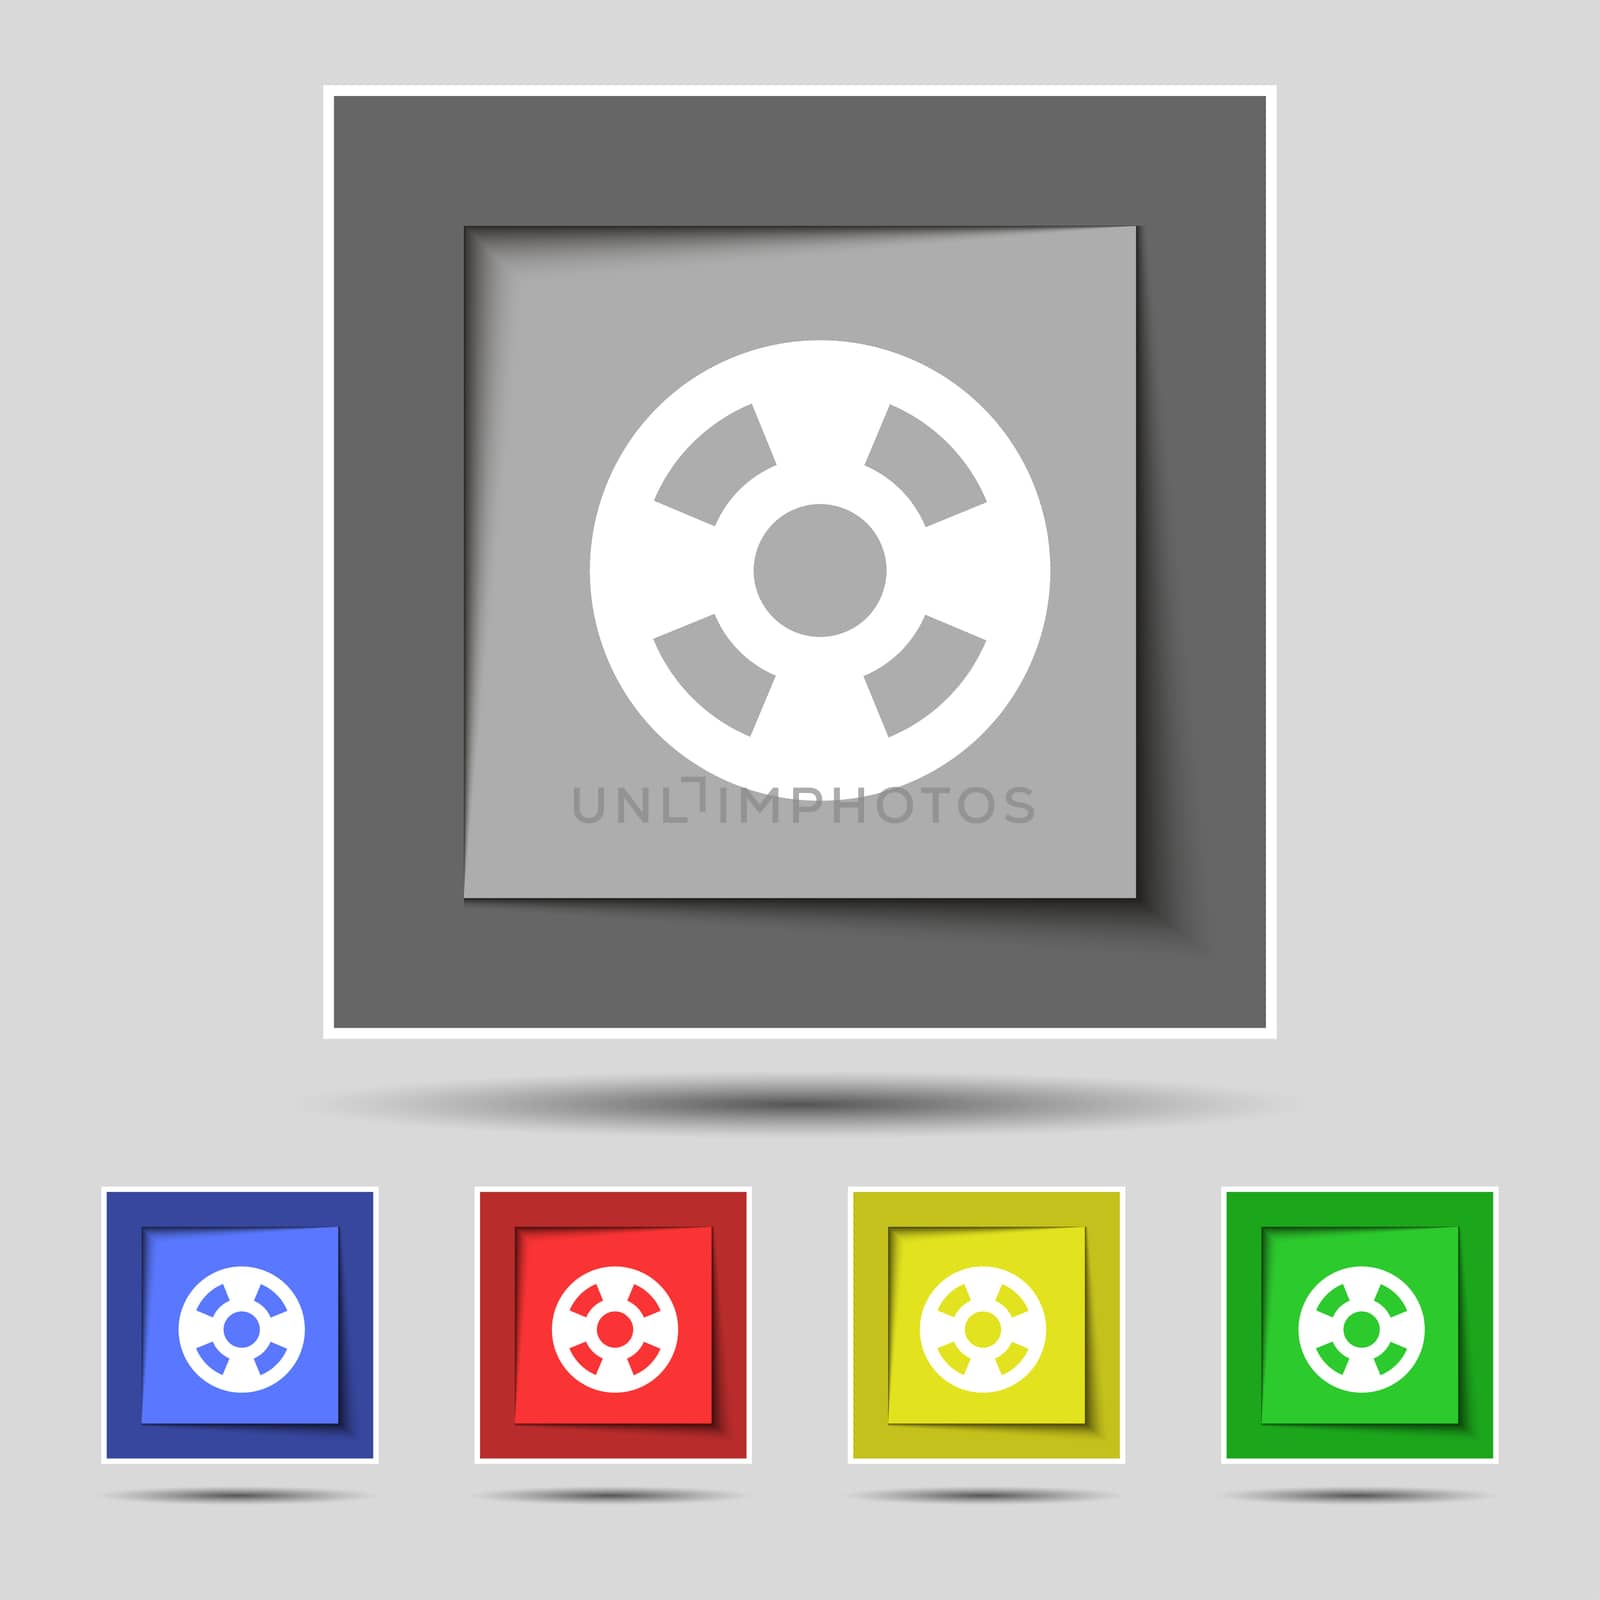 film icon sign on original five colored buttons. illustration